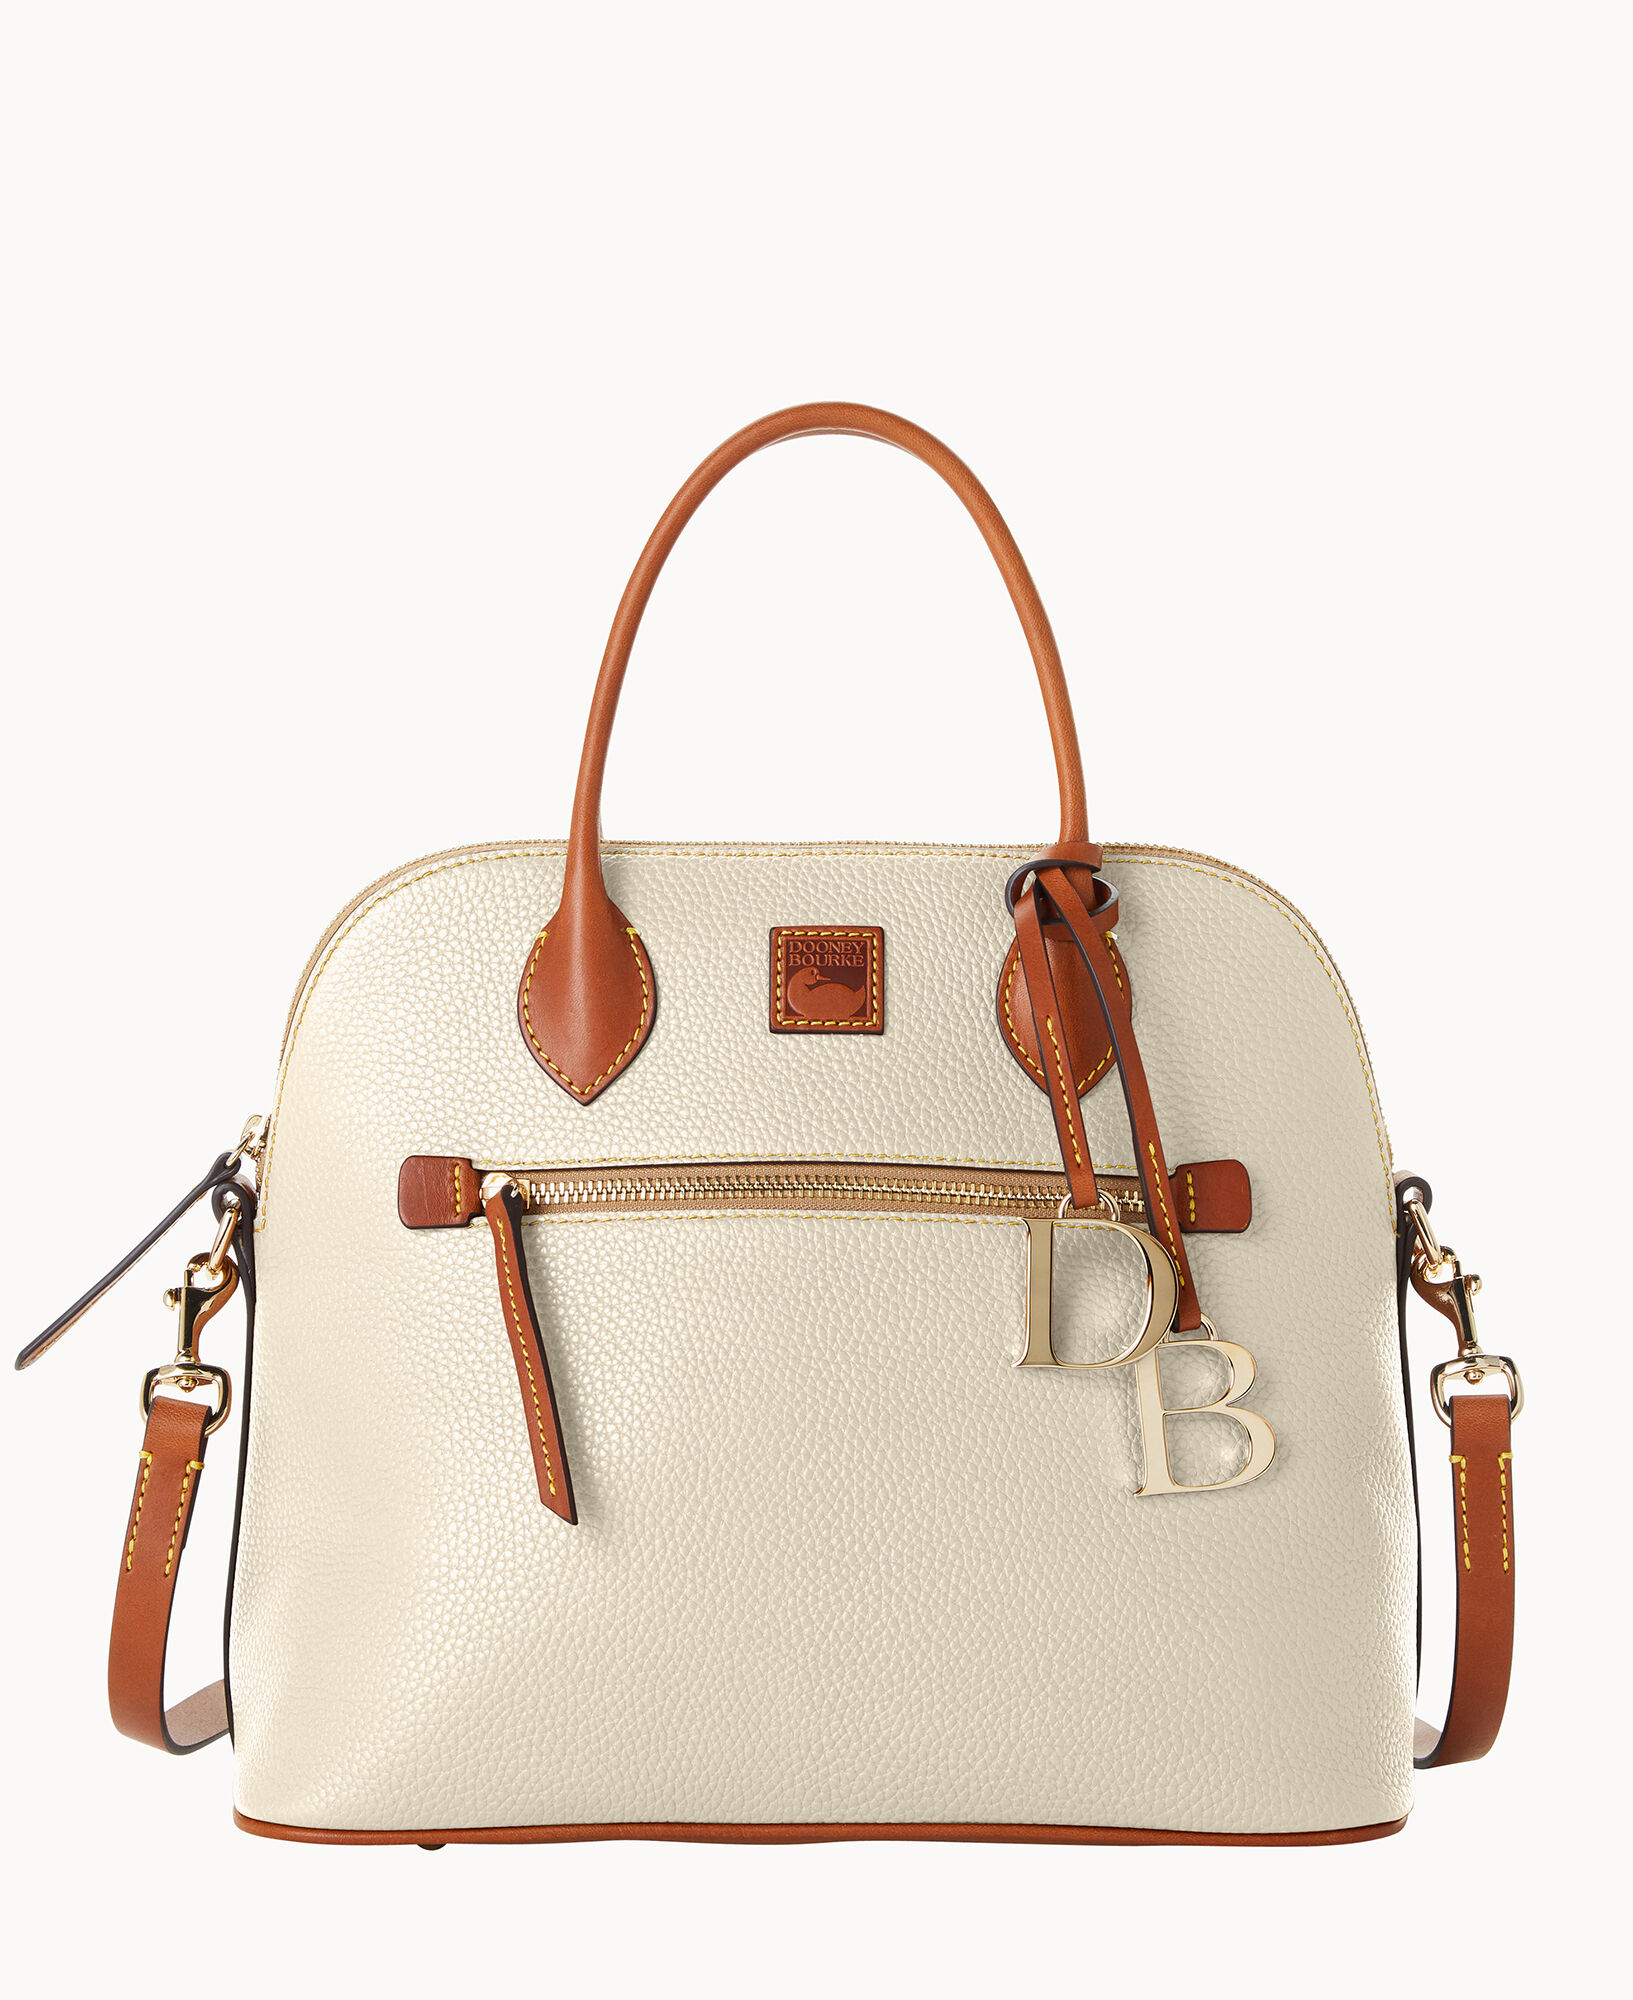 Dooney and Bourke |Small Domed Pocket Satchel